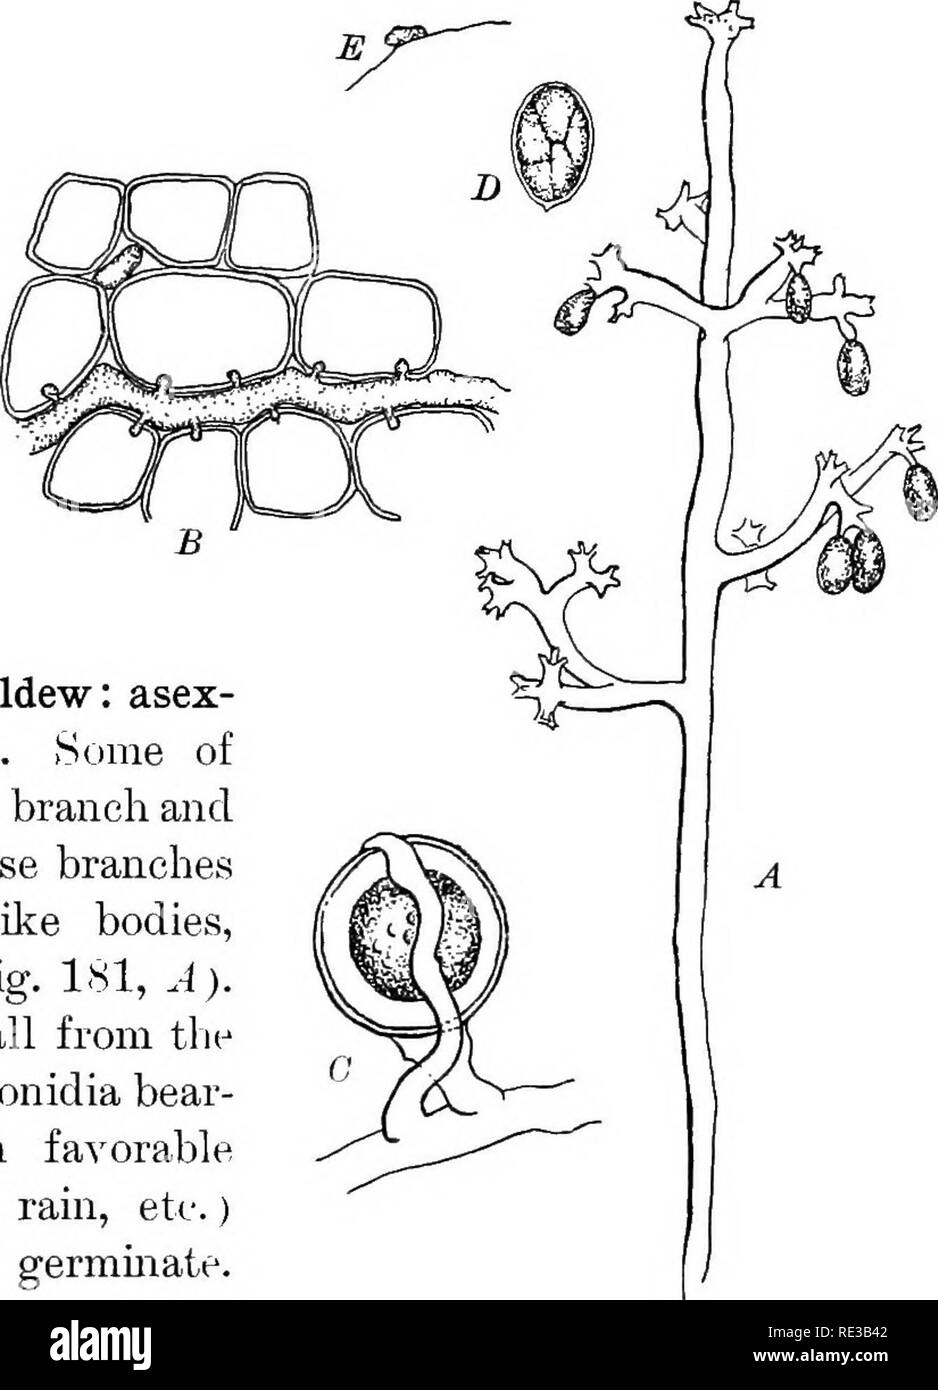 . Practical botany. Botany. THE ALGvE-FUNGI (PHYCOMYCETES) 221 (haustoria), wliich absorb food directly from the cell contents of the host (Fig. 181, 5). When the mildew has thus grown within the leaf for a time, it sends through the stomata on the under surface numer- ous branches which consti- tute the super- ficial downy patches char- acteristic of the parasite. 211. Grape mildew: asex- ual reproduction. Some of the aerial hyphse branch and upon tips of these branches produce spore-like bodies, the conidia (Fig. 181, A). These conidia fall from the conidiophores (conidia bear- ers), and whe Stock Photo